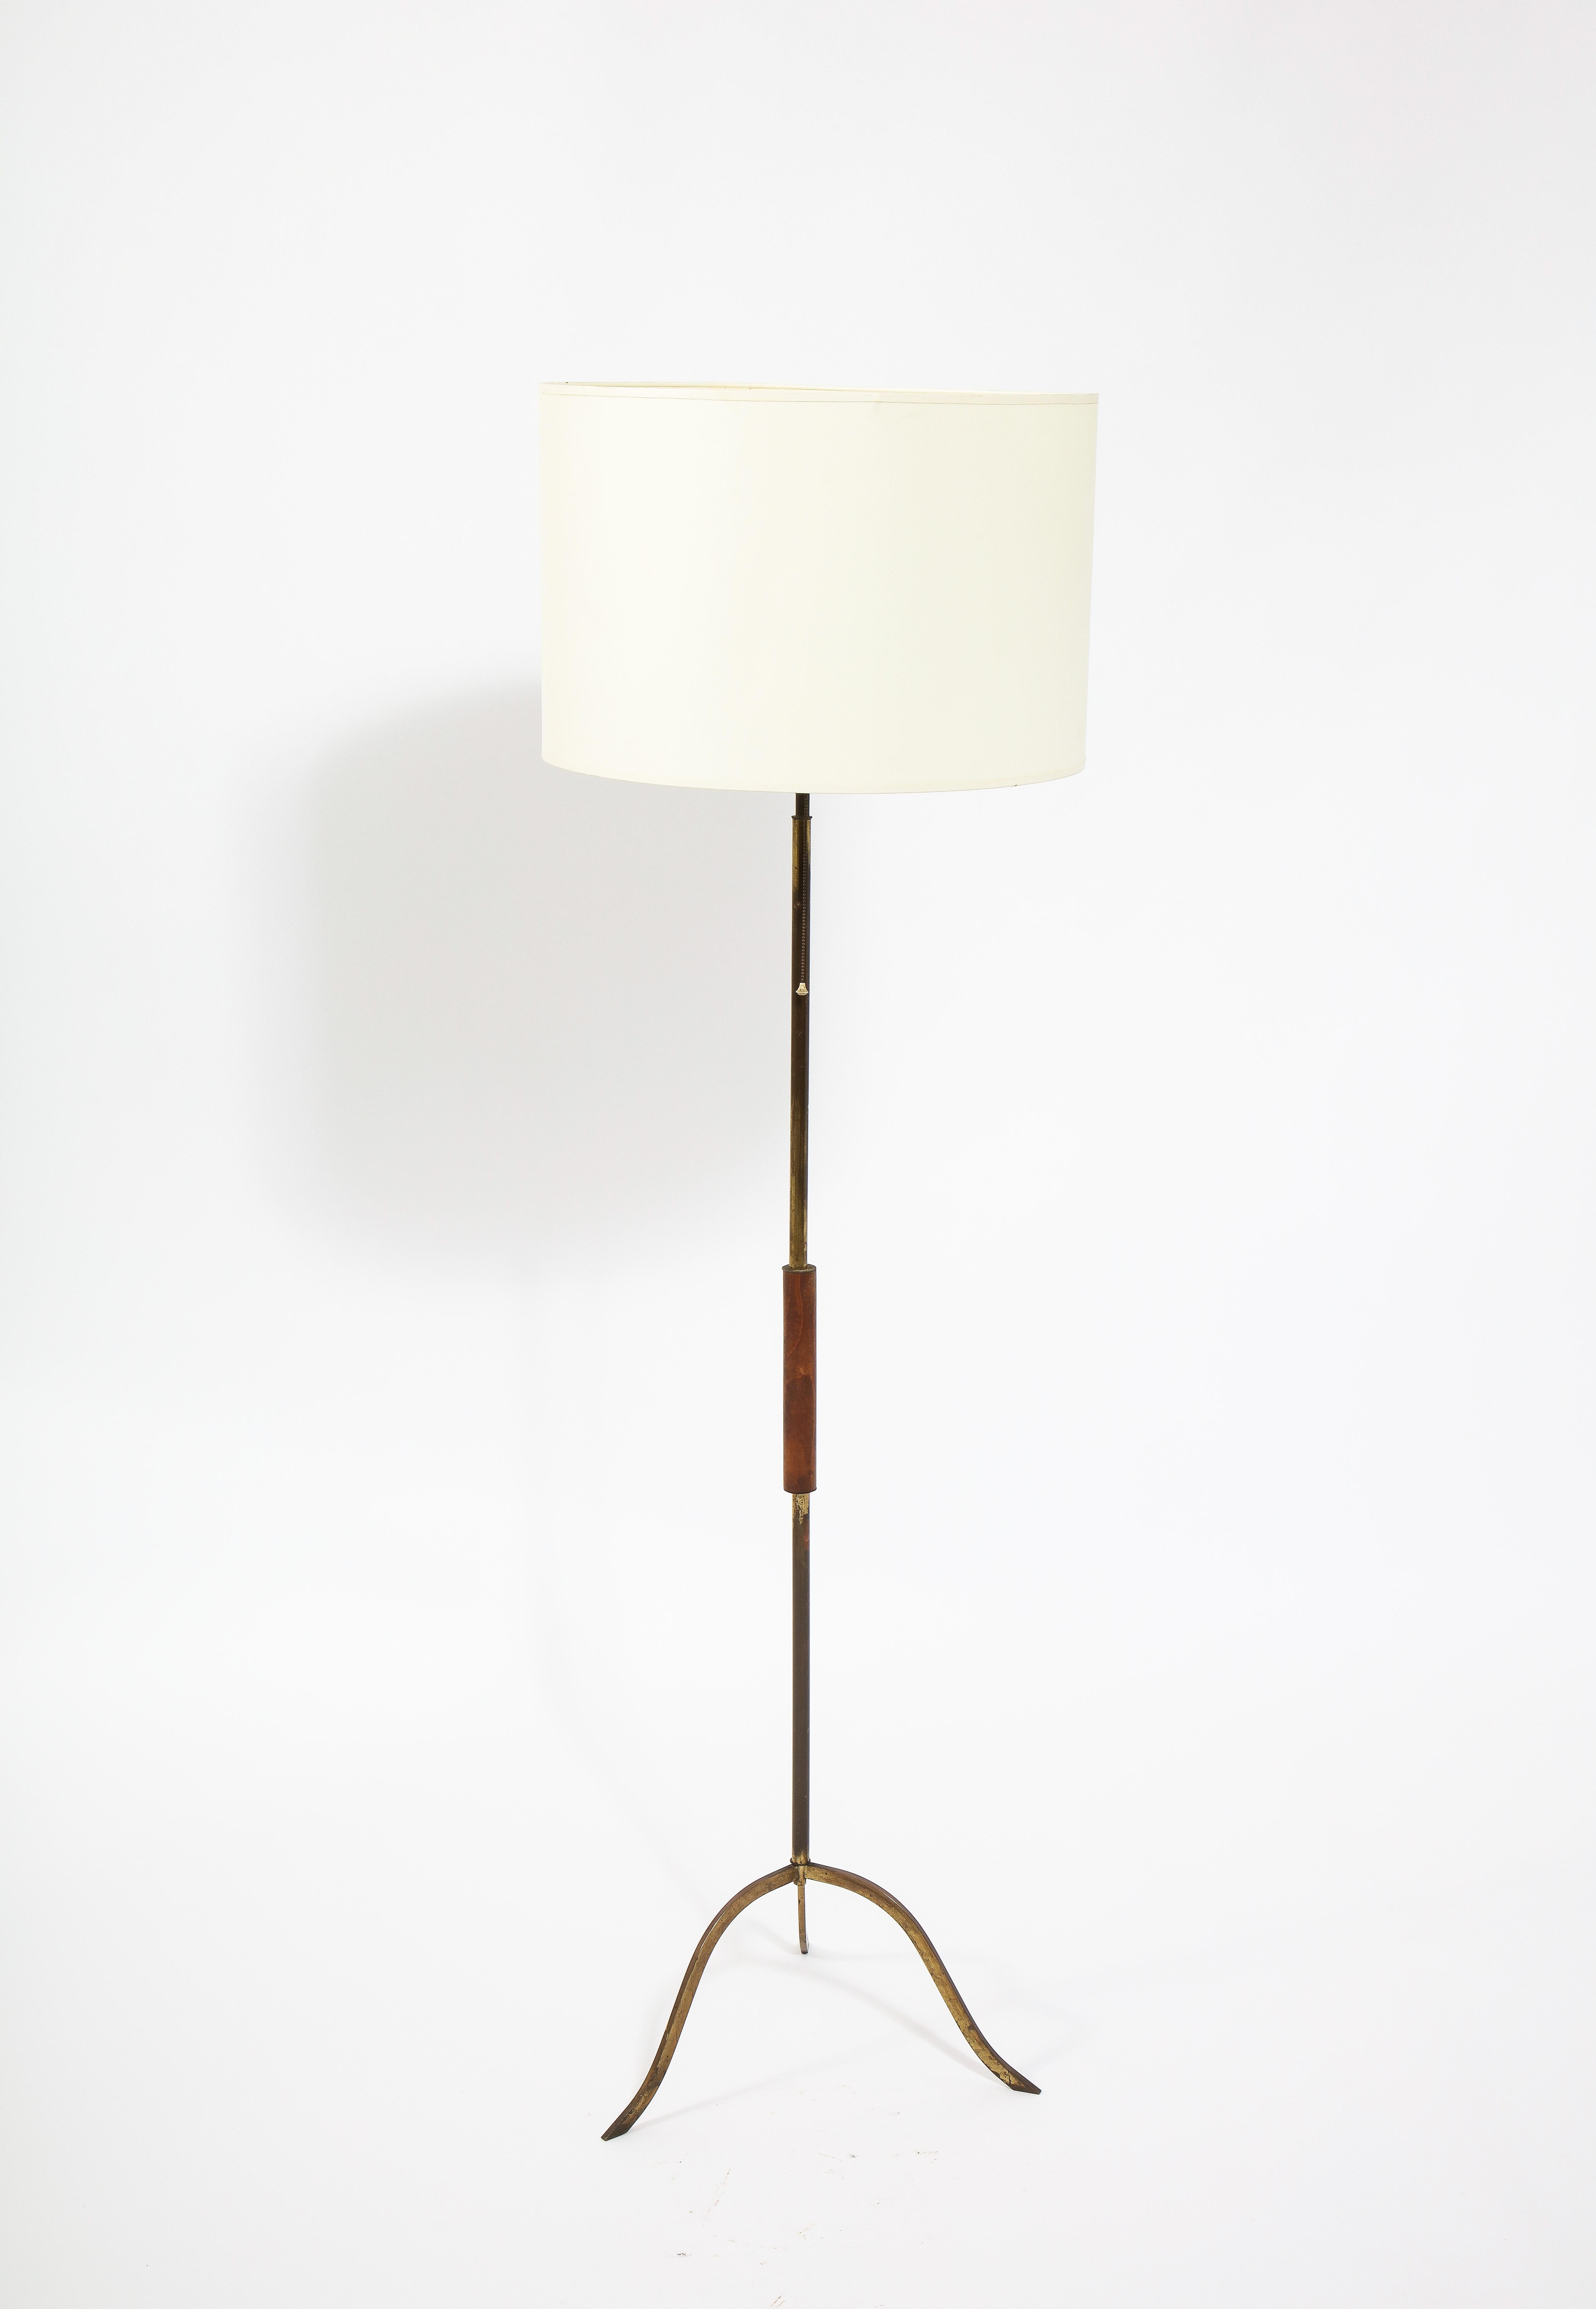 Elegant tripod floor lamp in brass with a walnut handle. Shade for photographic purposes.